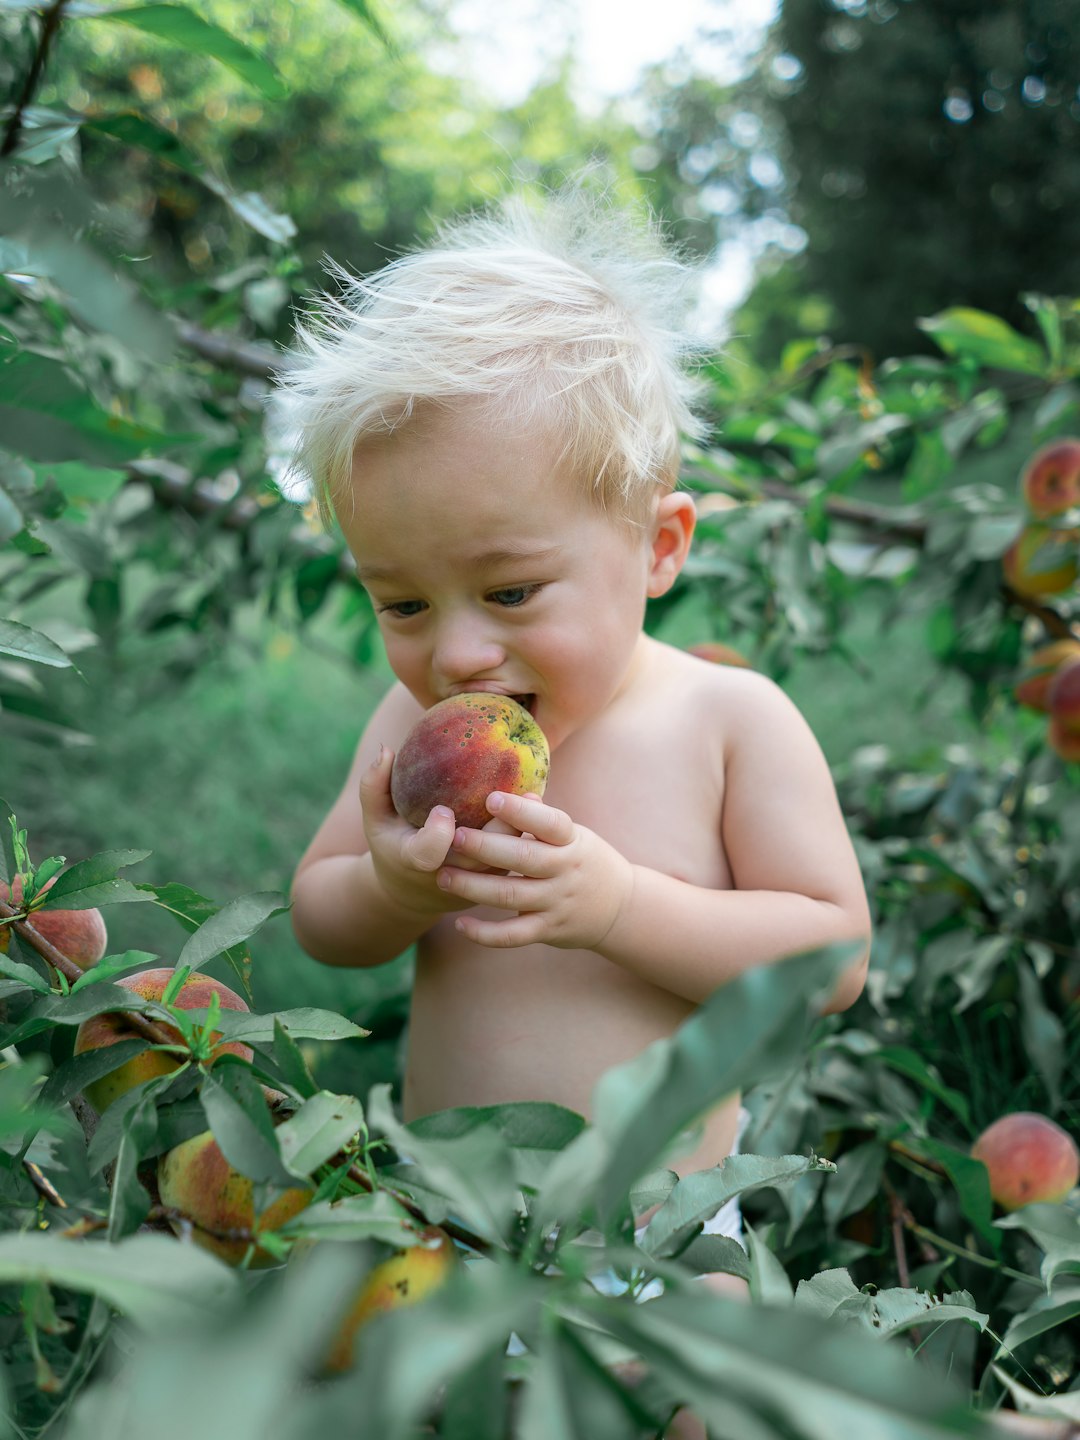 topless boy holding apple during daytime